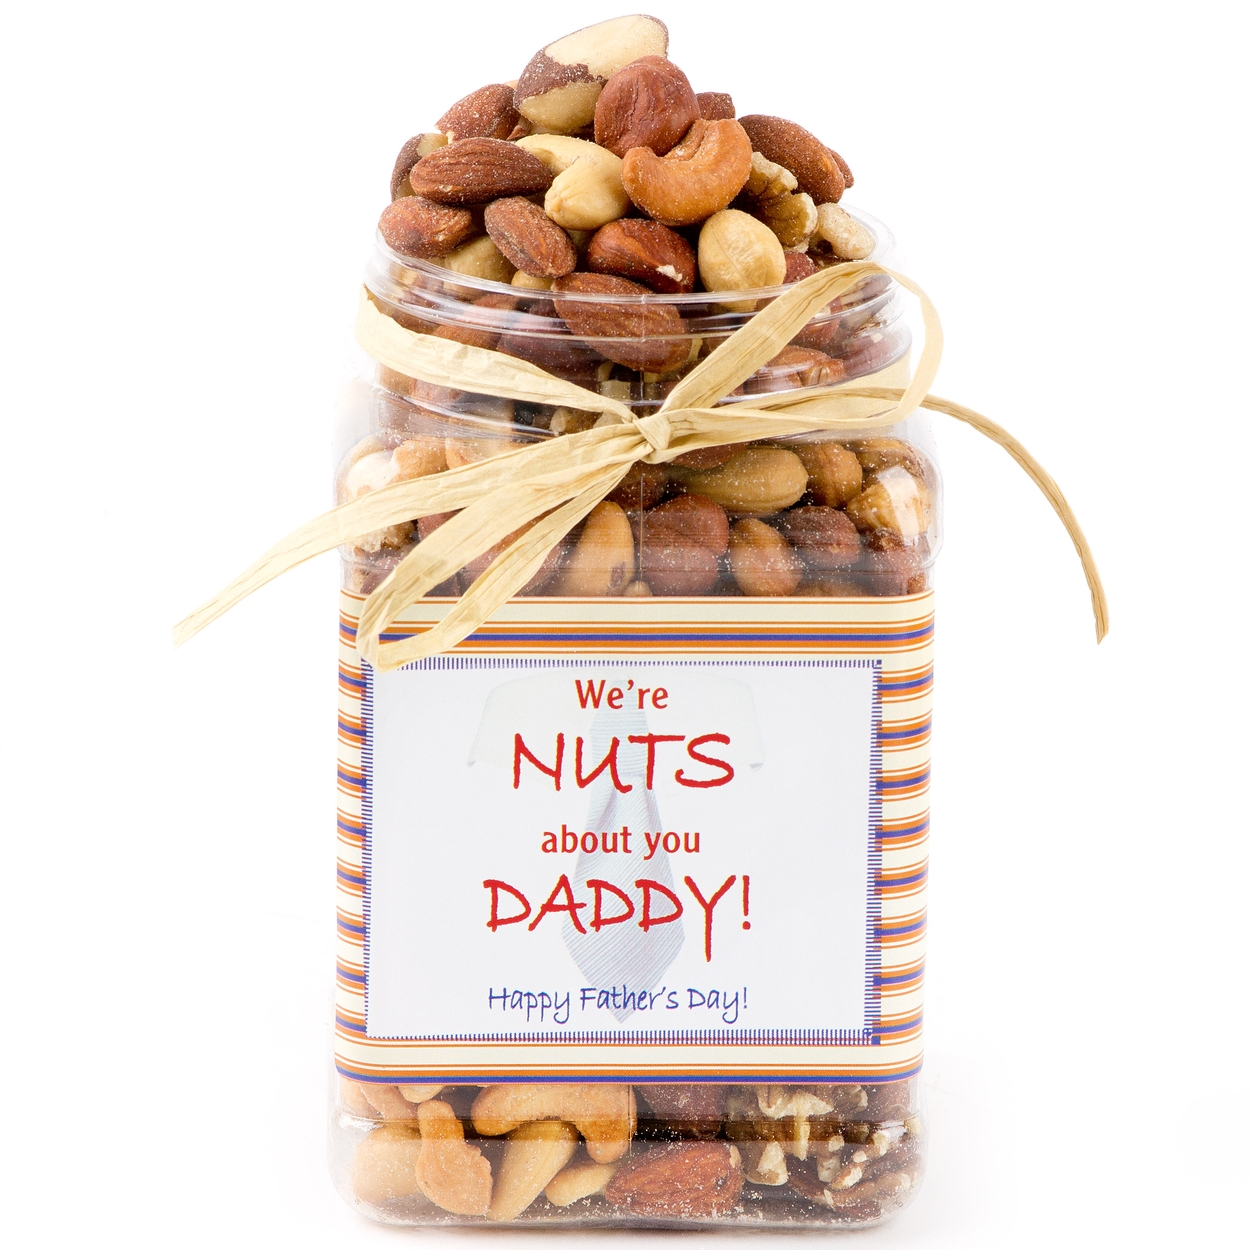 We are Nuts About You Daddy' Mixed Nut Gift • Father's Day Gift Baskets •  Holiday Gifts, Chocolate & Candy • Oh! Nuts®